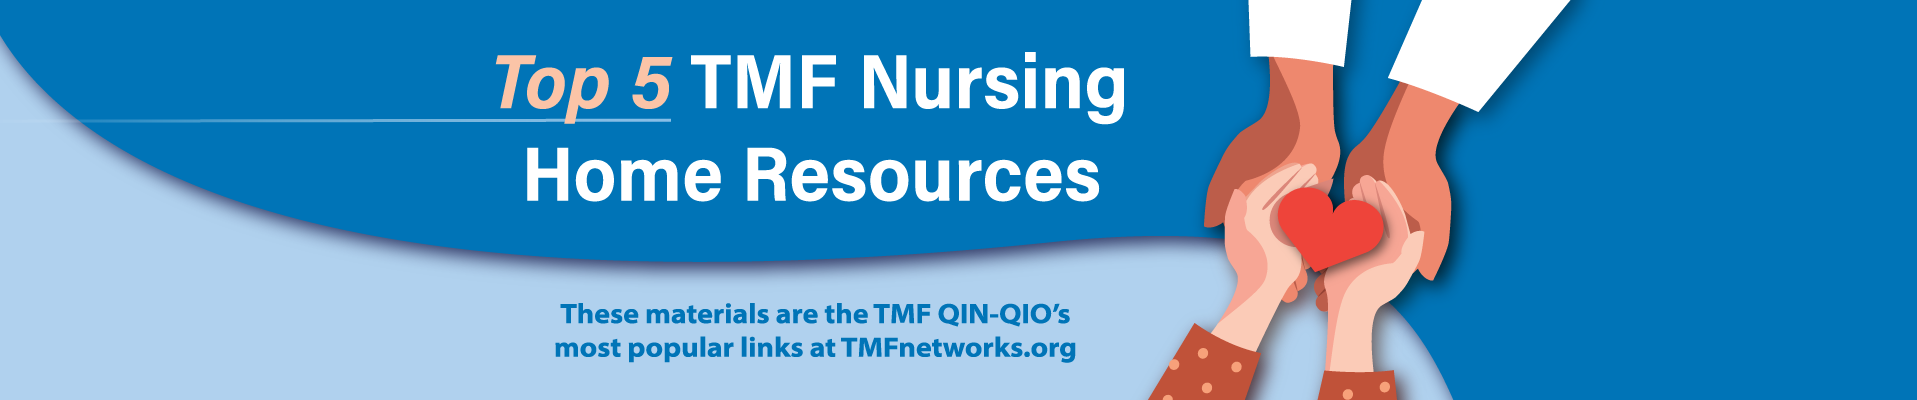 Access the top 5 TMF Nursing Home Resources